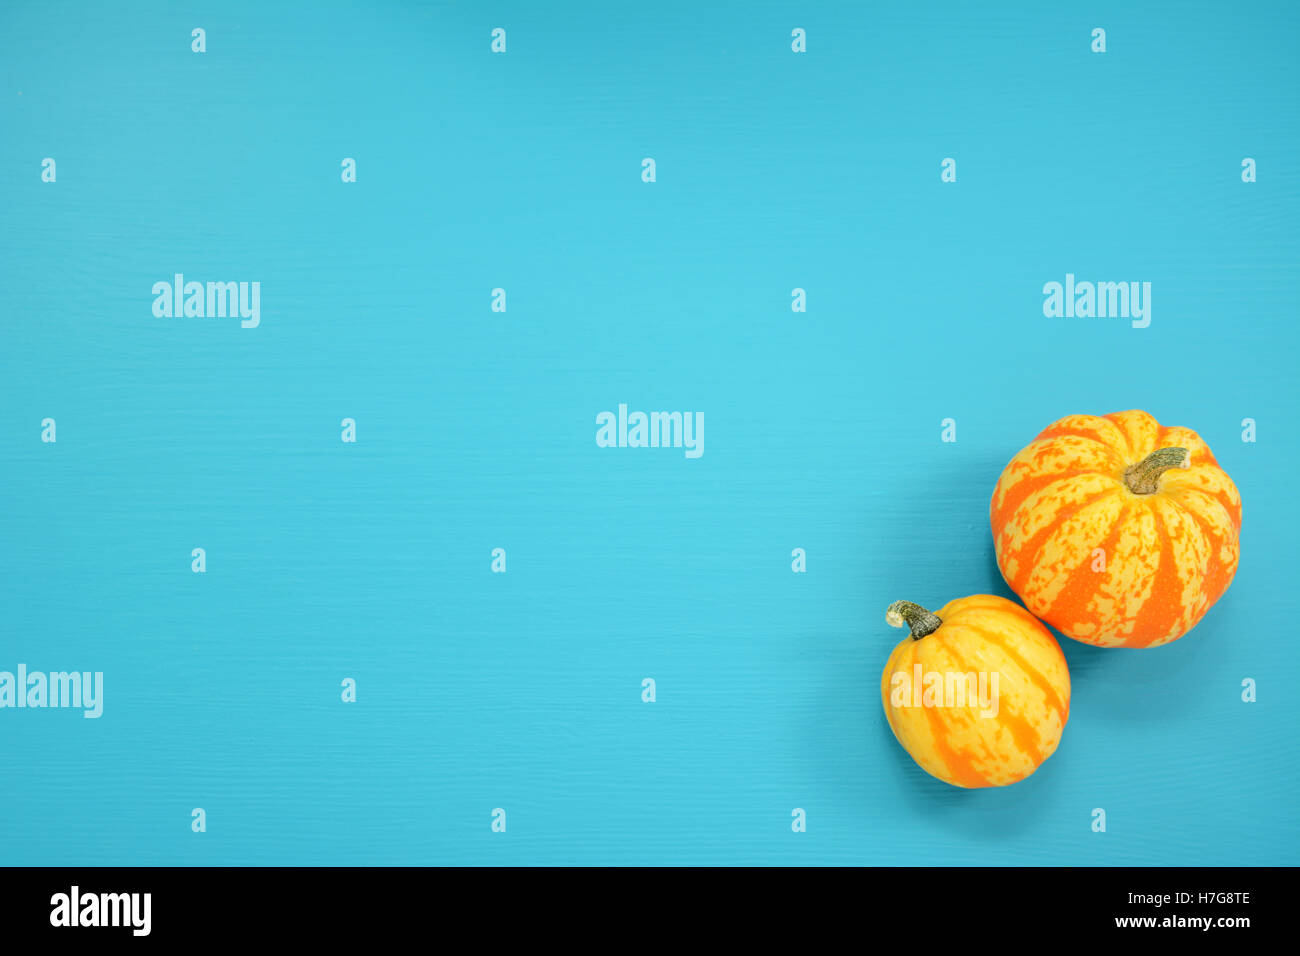 Two striped Festival squash on a teal painted wooden board background with copy space Stock Photo